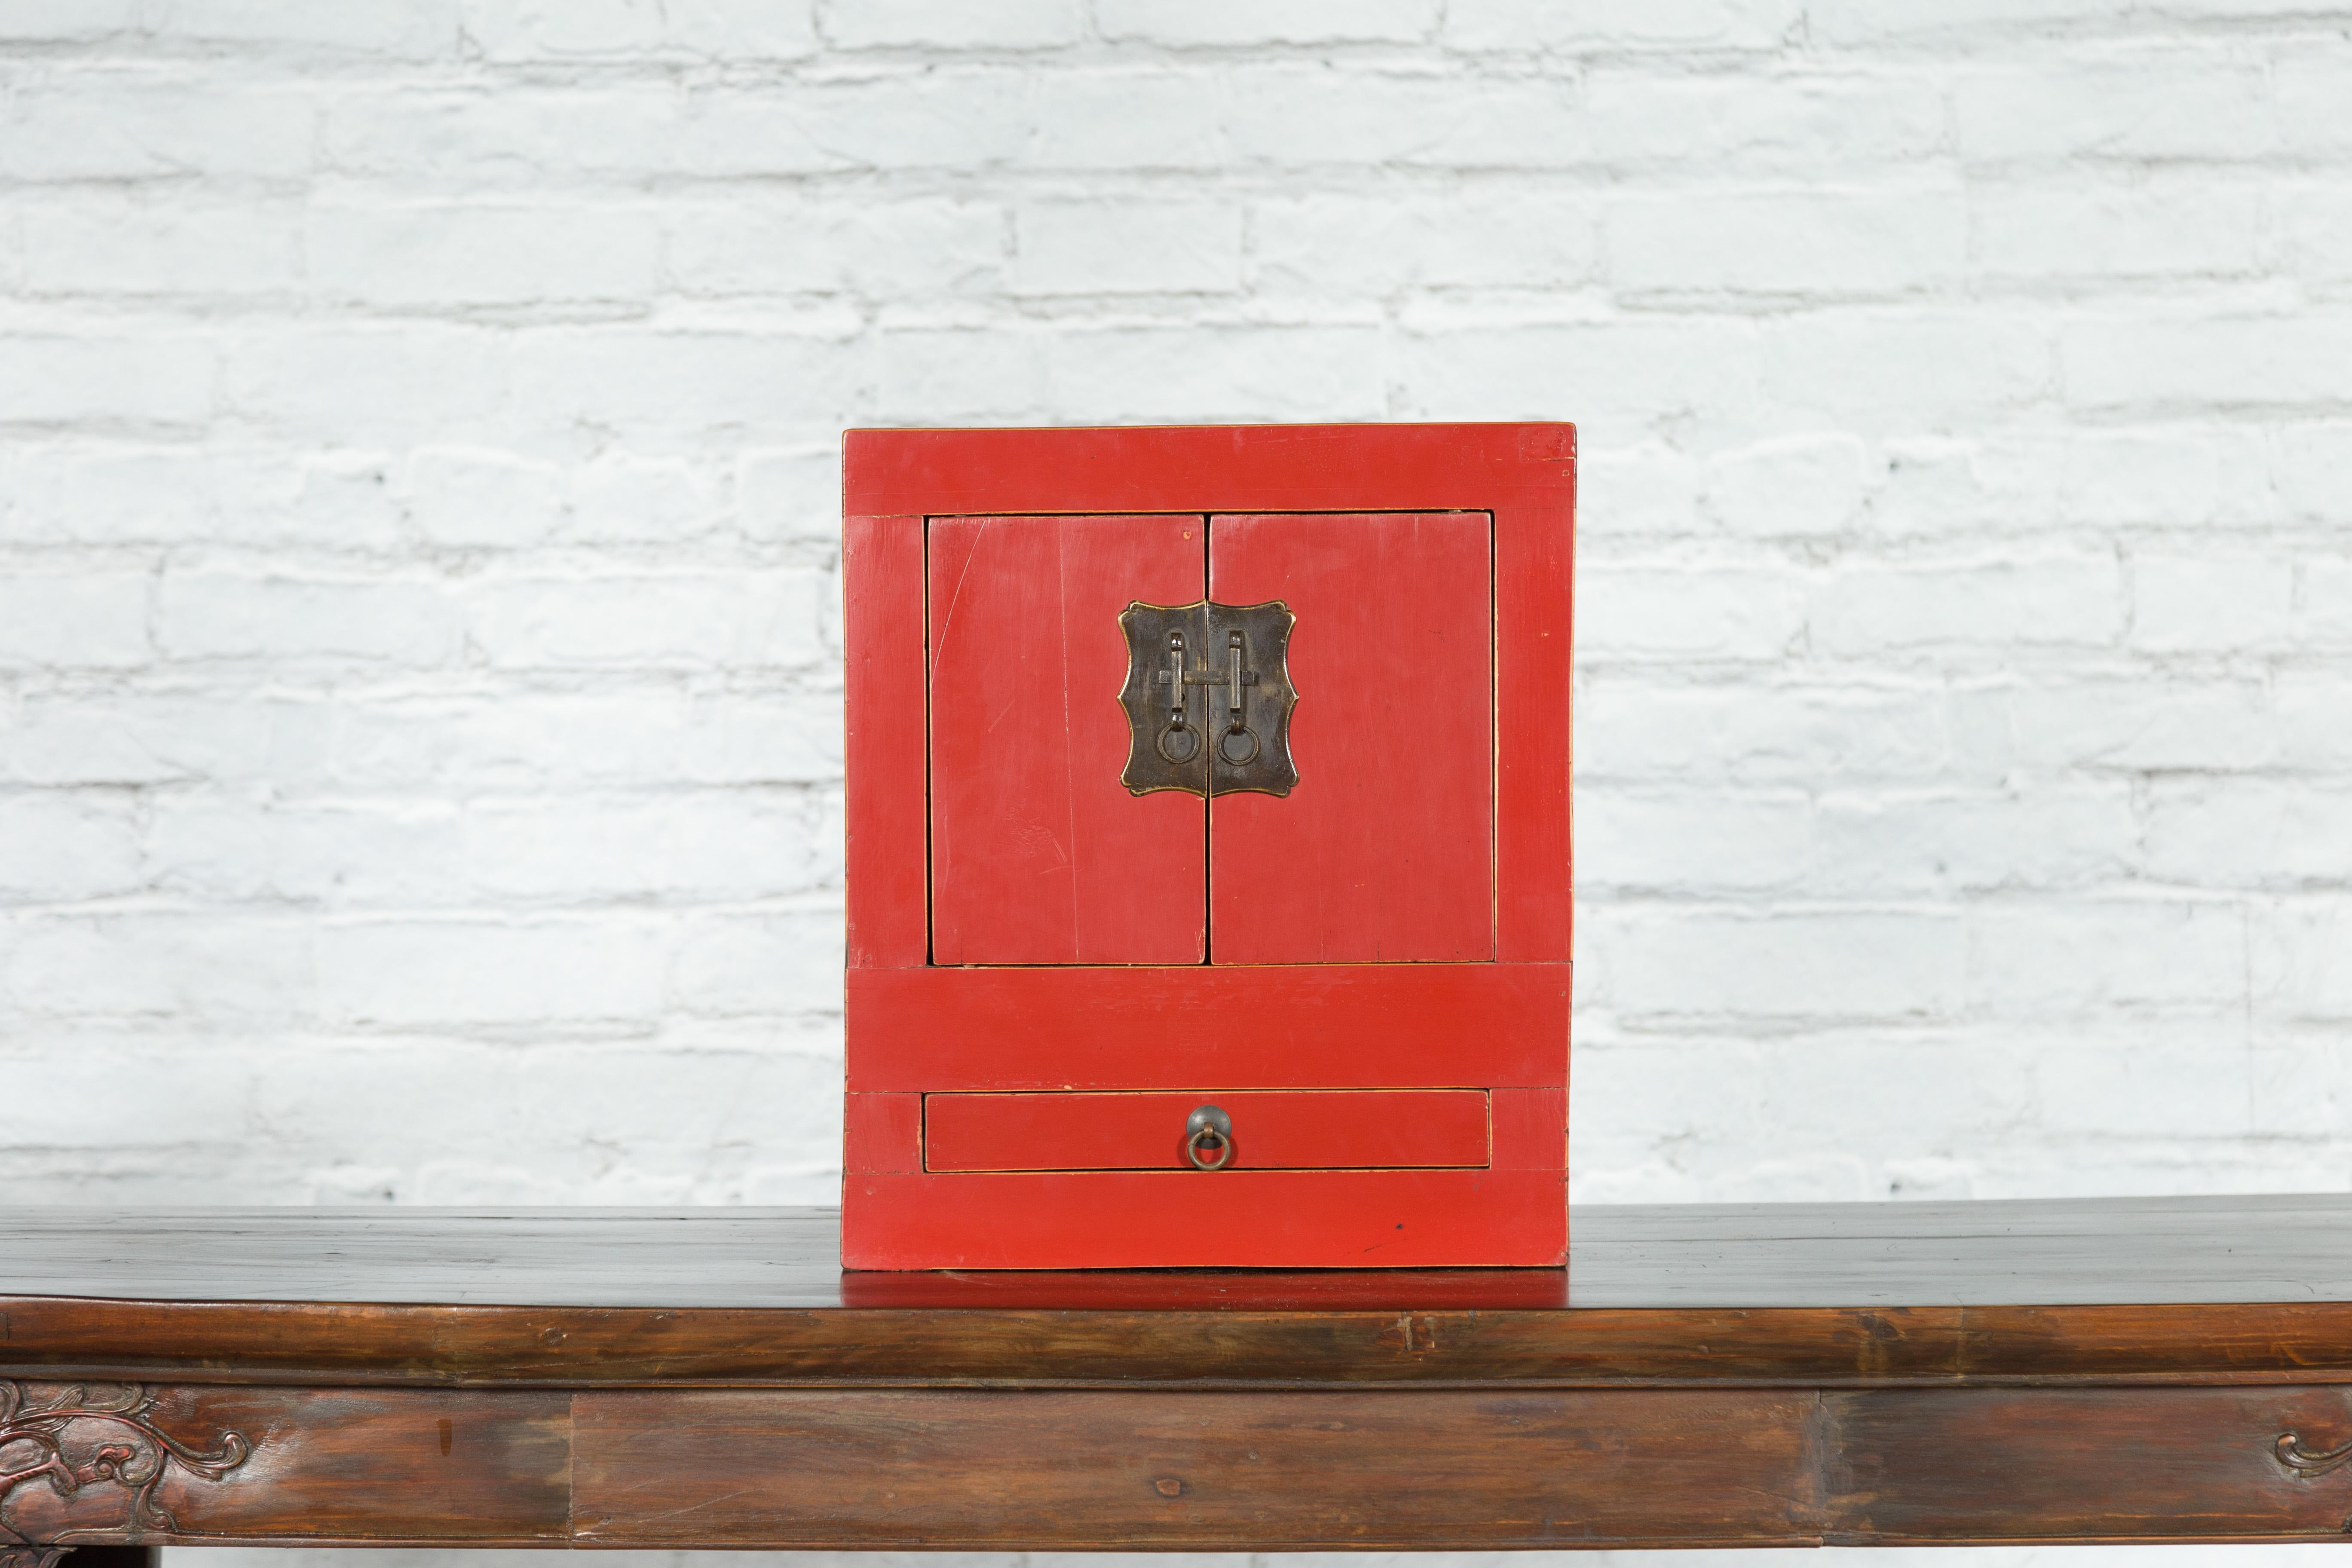 A small Chinese red lacquer cabinet from the early 20th century, with brass hardware and lower drawer. Created in China, this cabinet is characteristic of the early 20th century Chinese style. Showcasing a linear silhouette, the cabinet features two